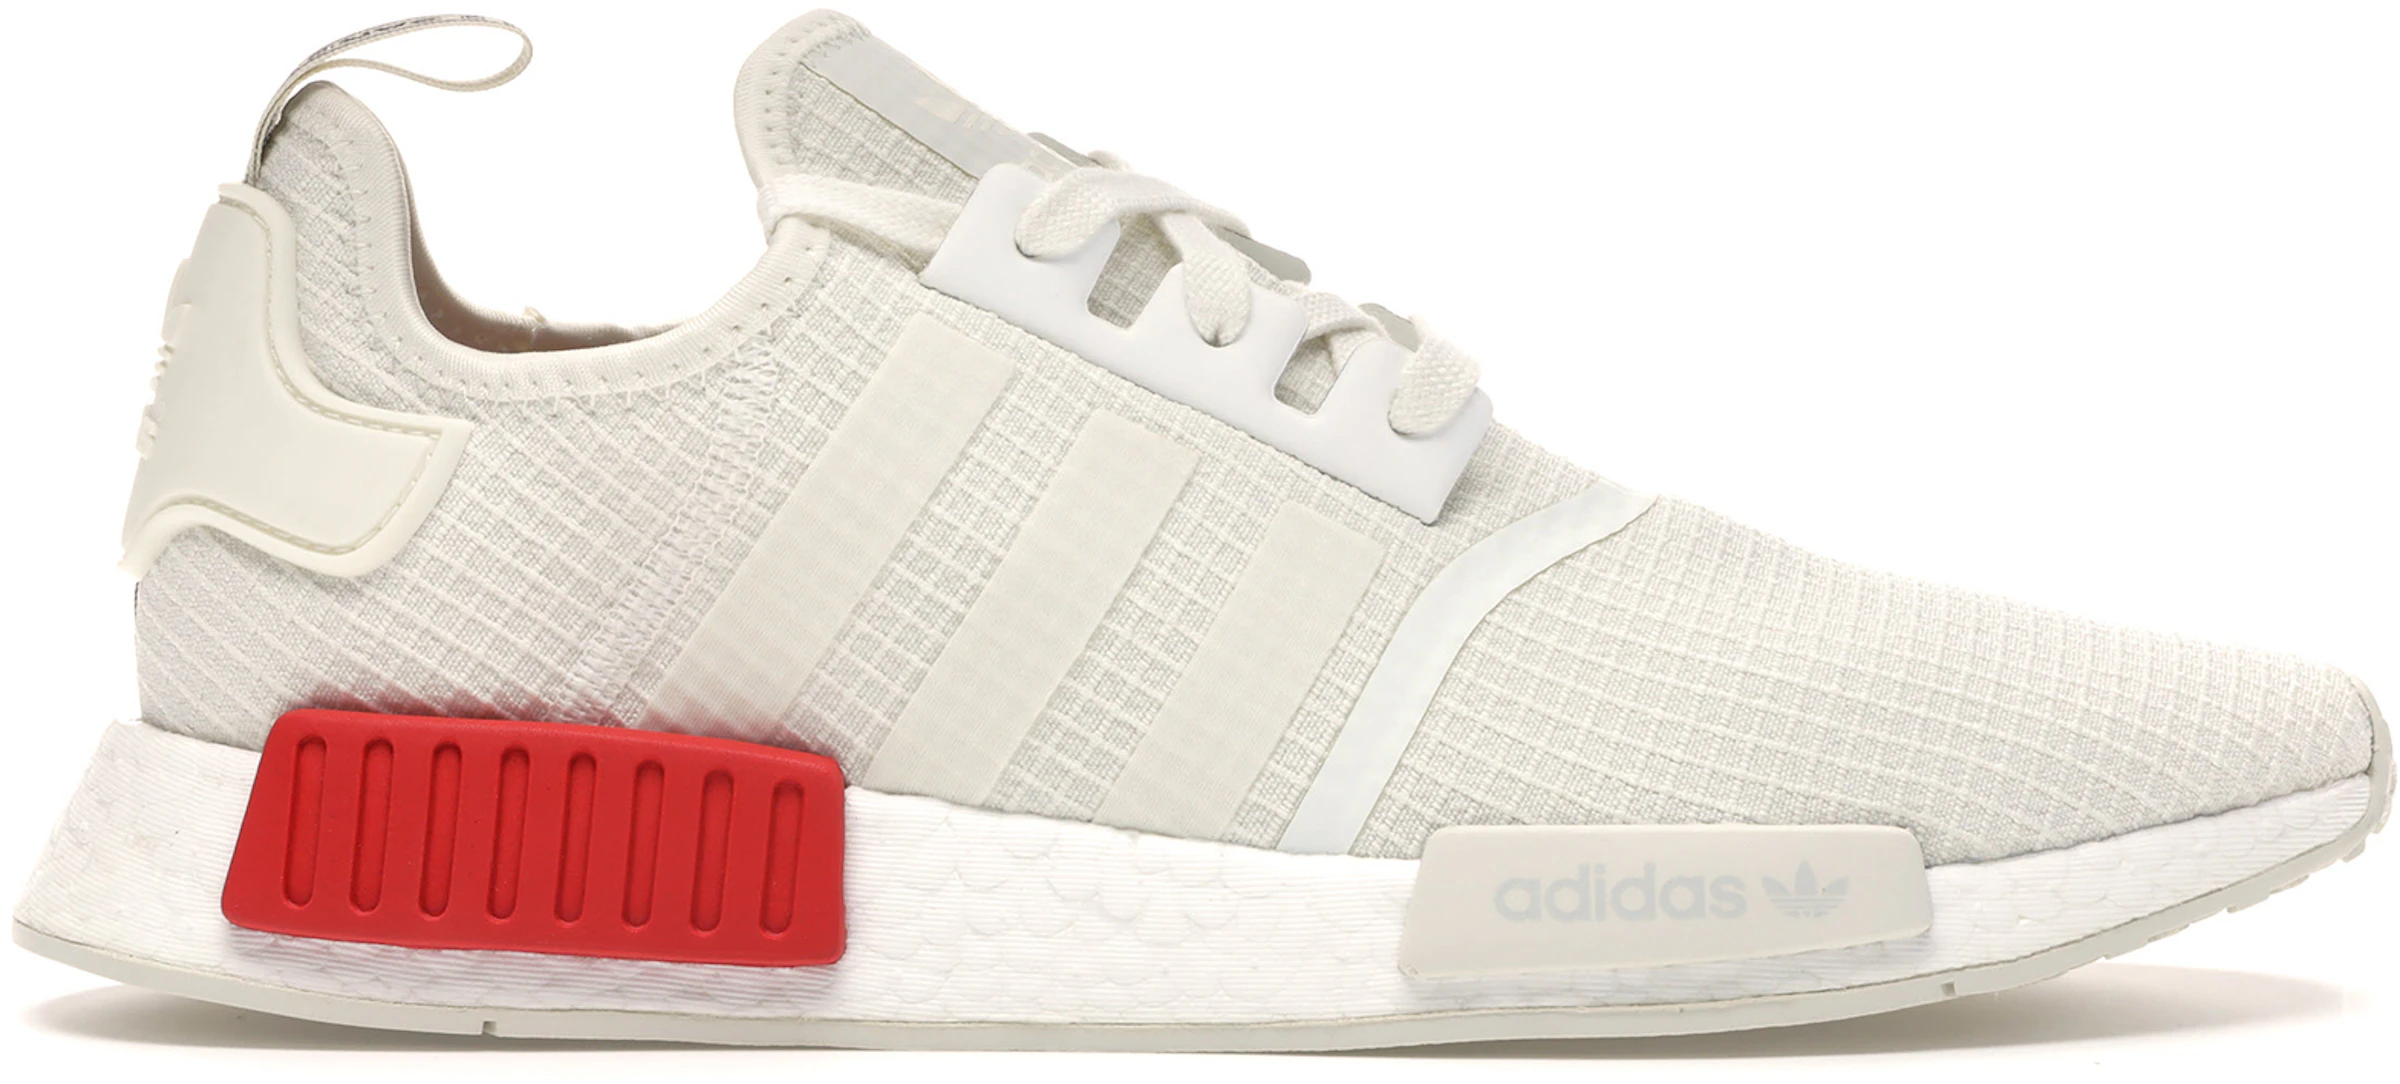 NMD Off White Lush Red - ES